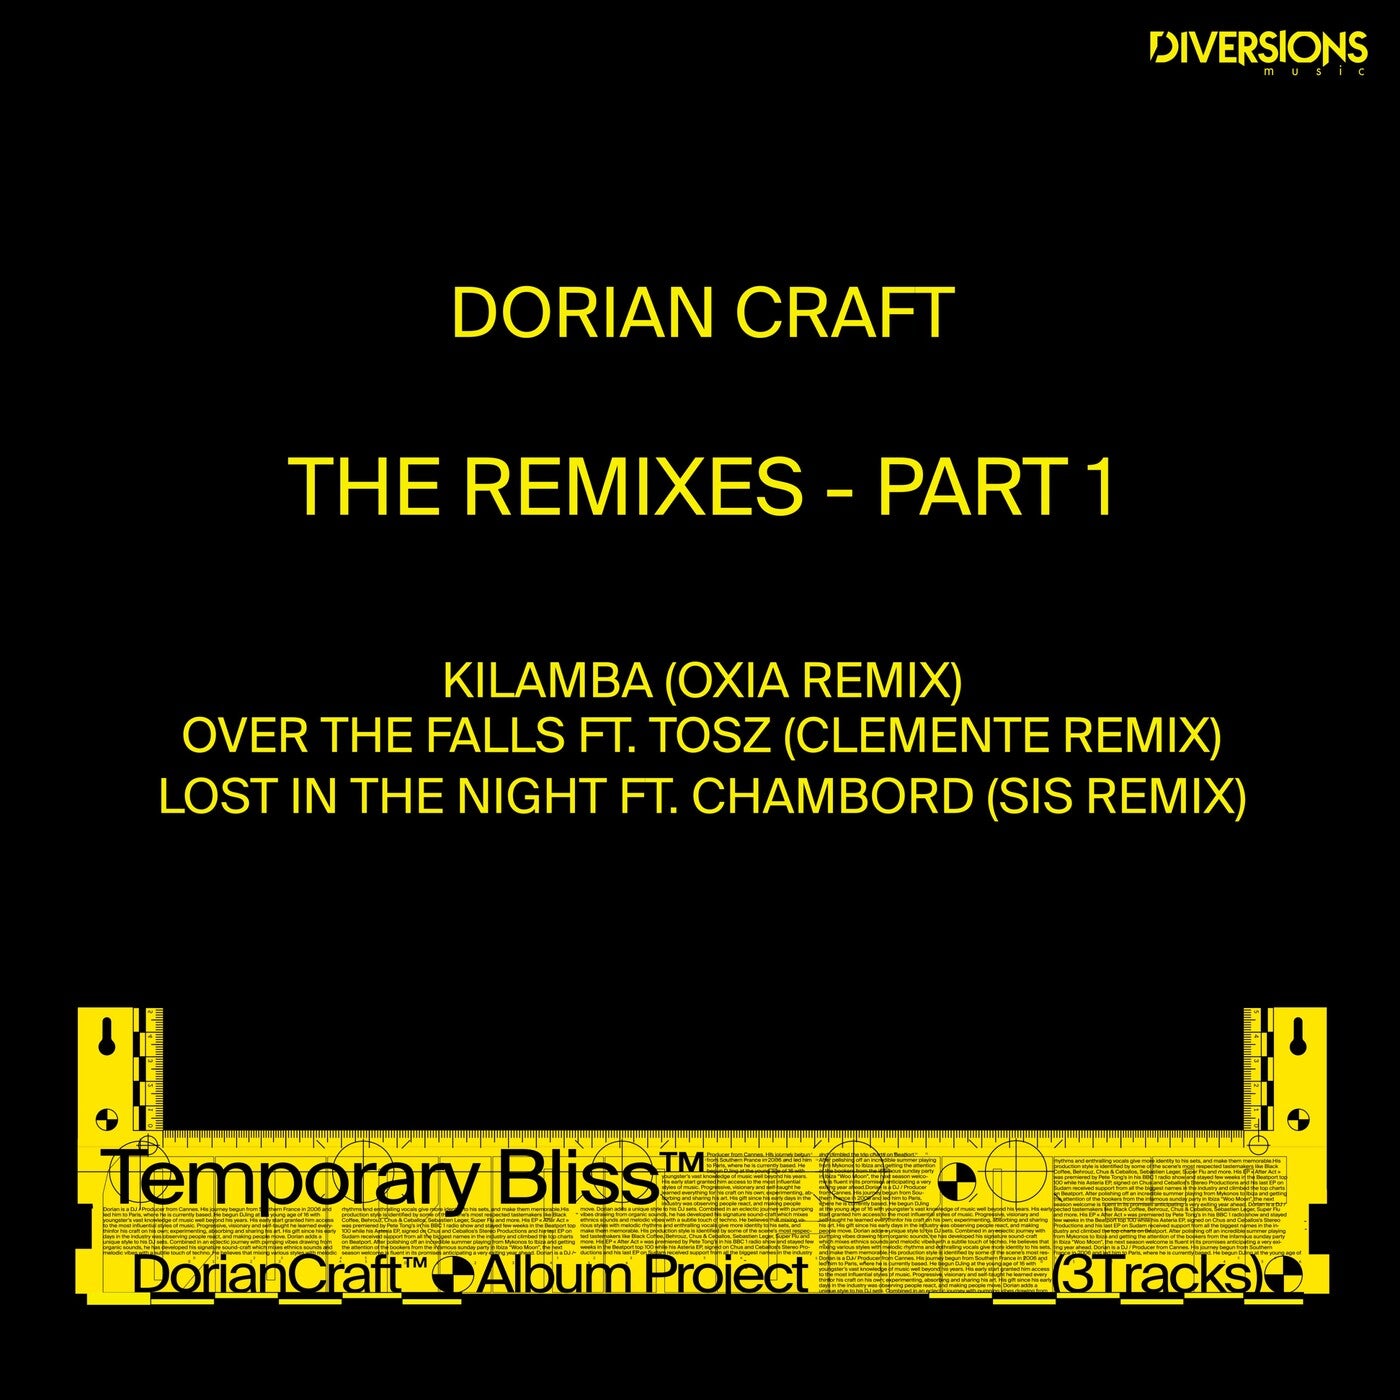 Cover - SIS, Dorian Craft, Chambord - Lost in the Night (Sis Remix)